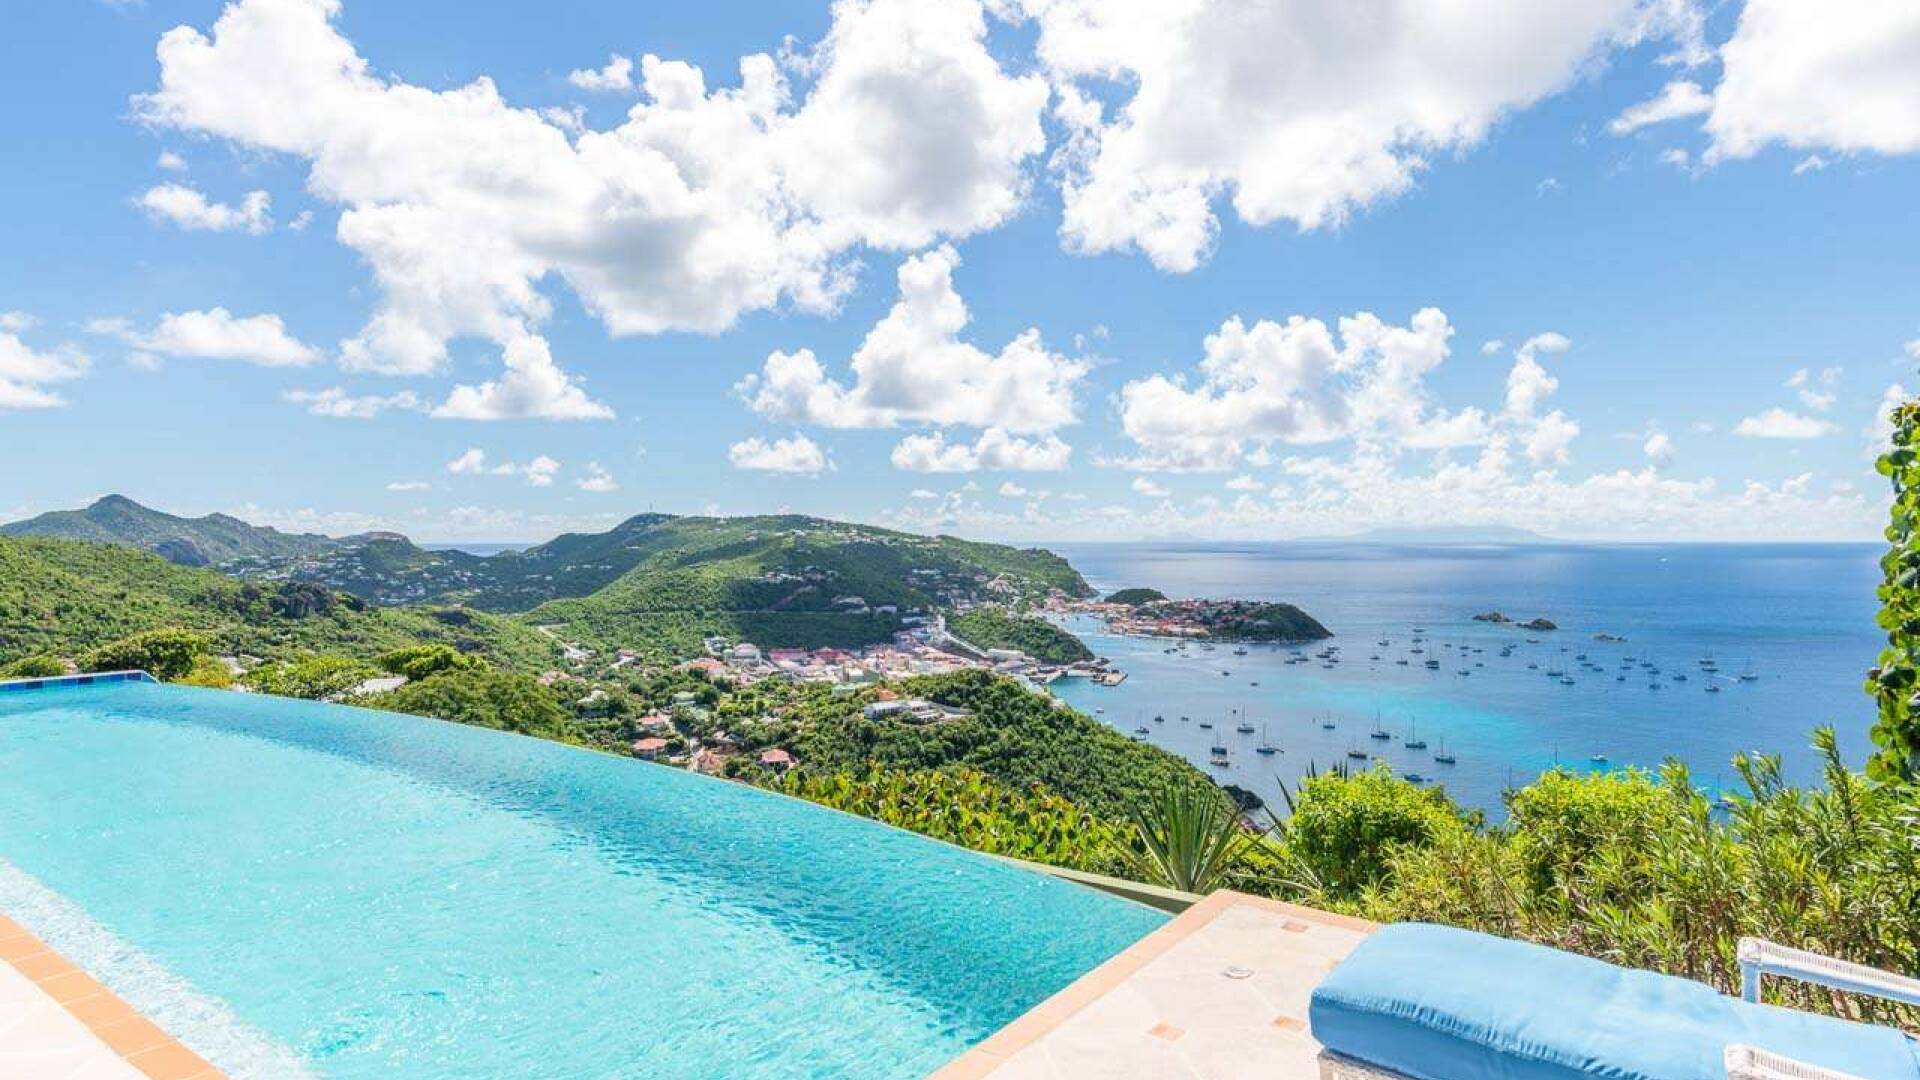 Villa Pool at WV MGO, Colombier, St. Barthelemy